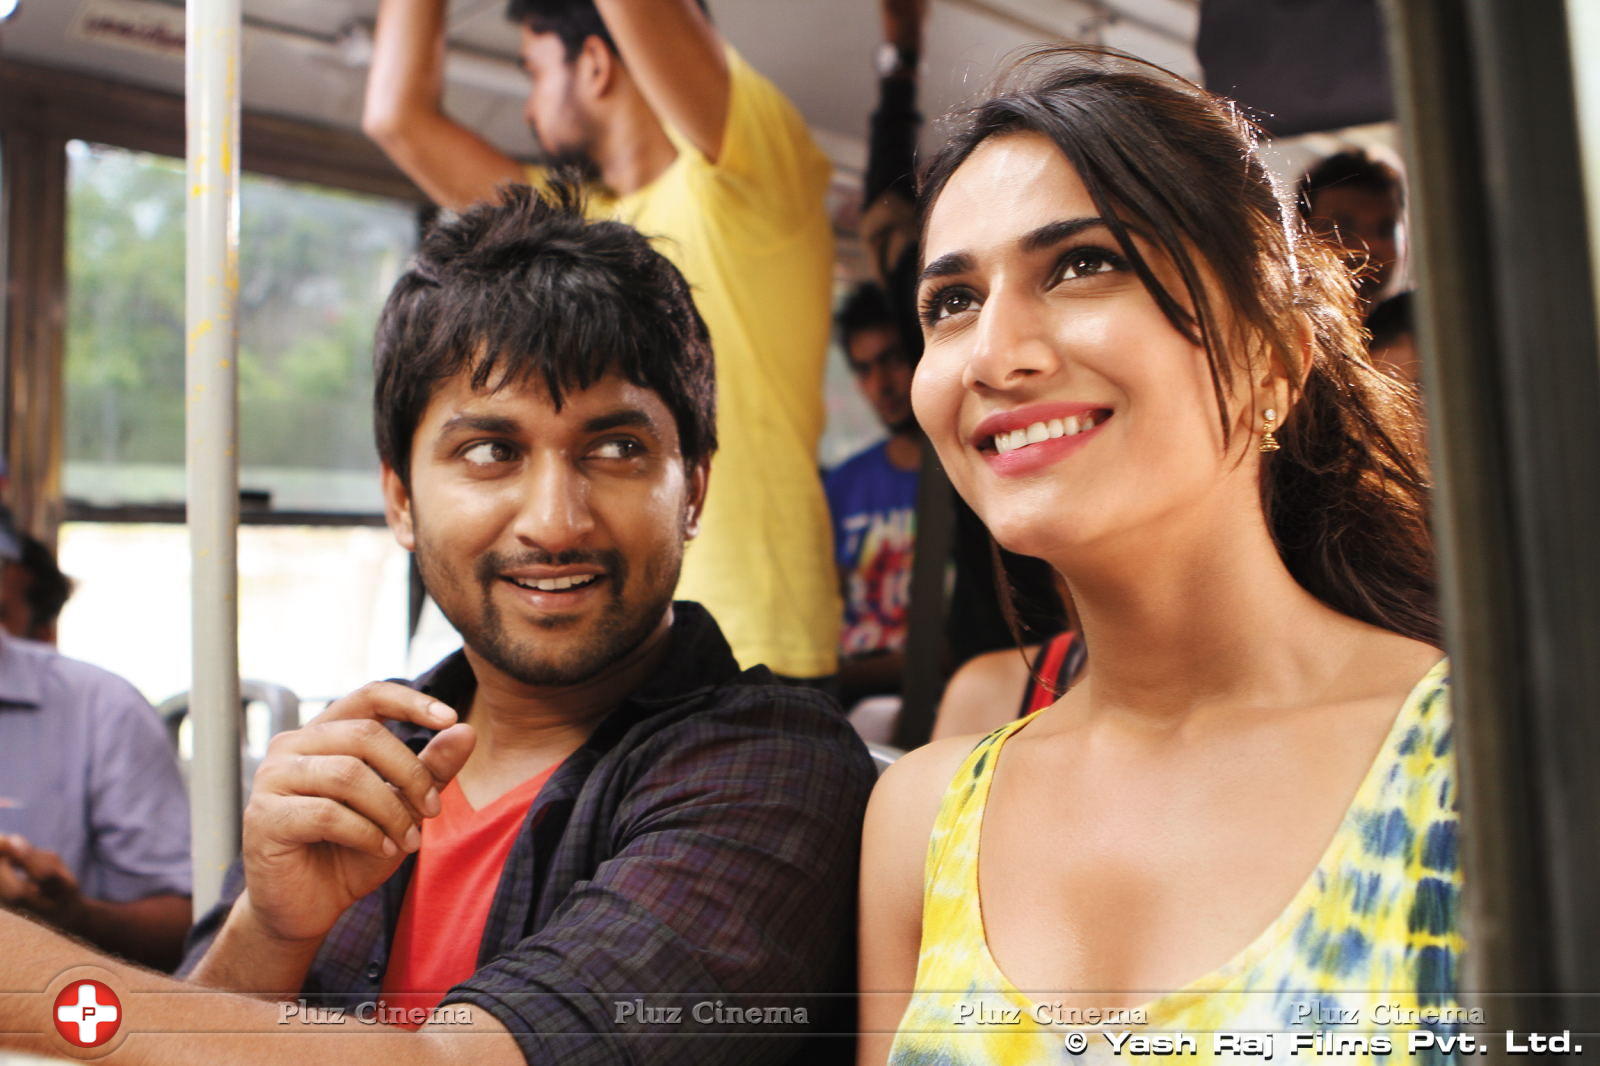 Aha Kalyanam Movie New Pictures | Picture 704850